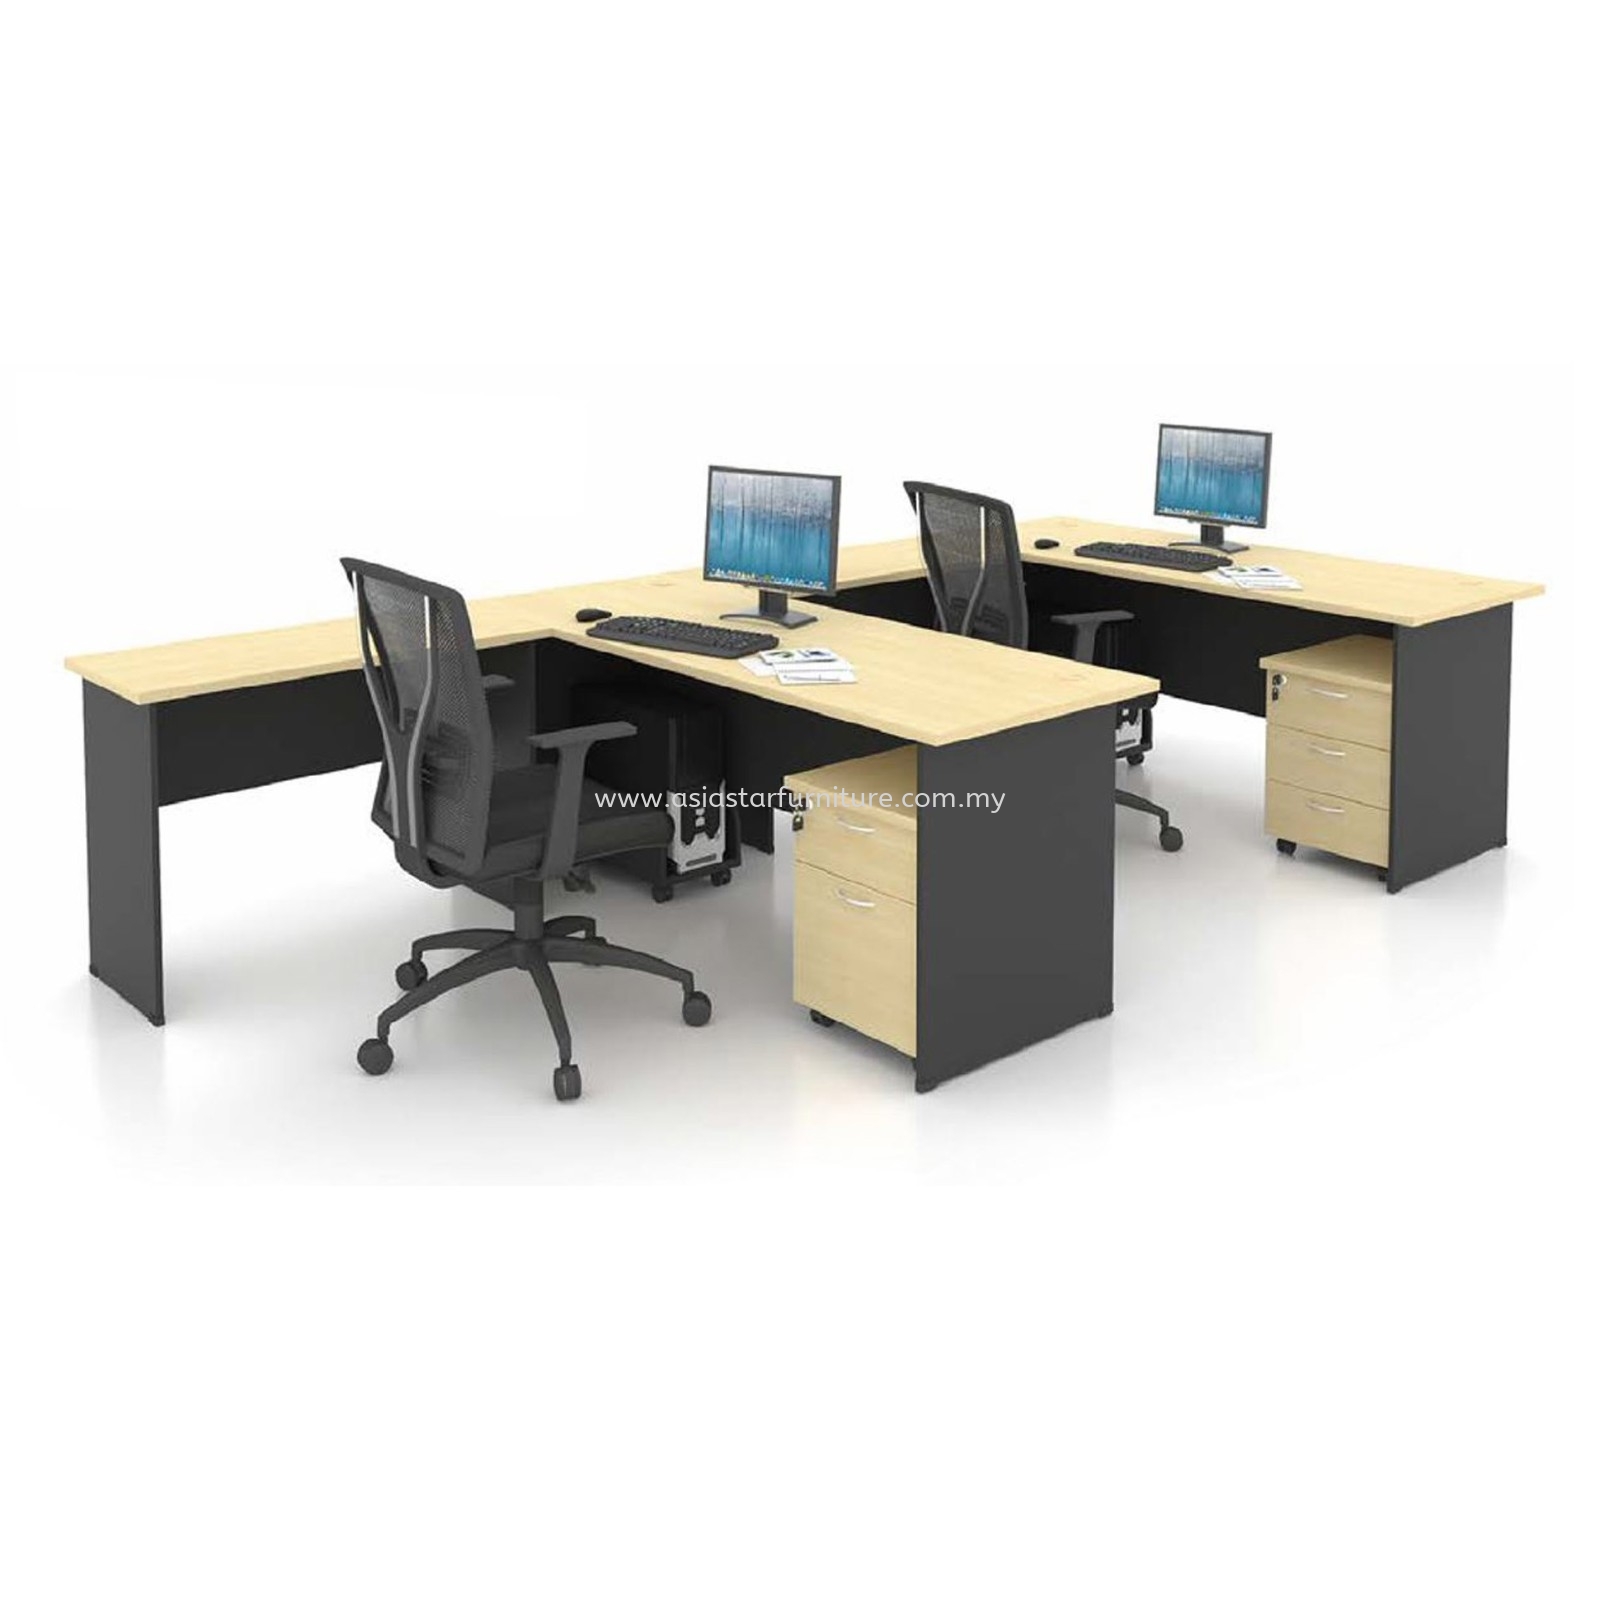 5' OFFICE TABLE | COMPUTER TABLE | STUDY TABLE C/W SIDE TABLE AND DRAWER 1D1F SET - office table Bukit Jalil | office table Taman Sea | office table Kuchai Lama | office table Old Klang Road